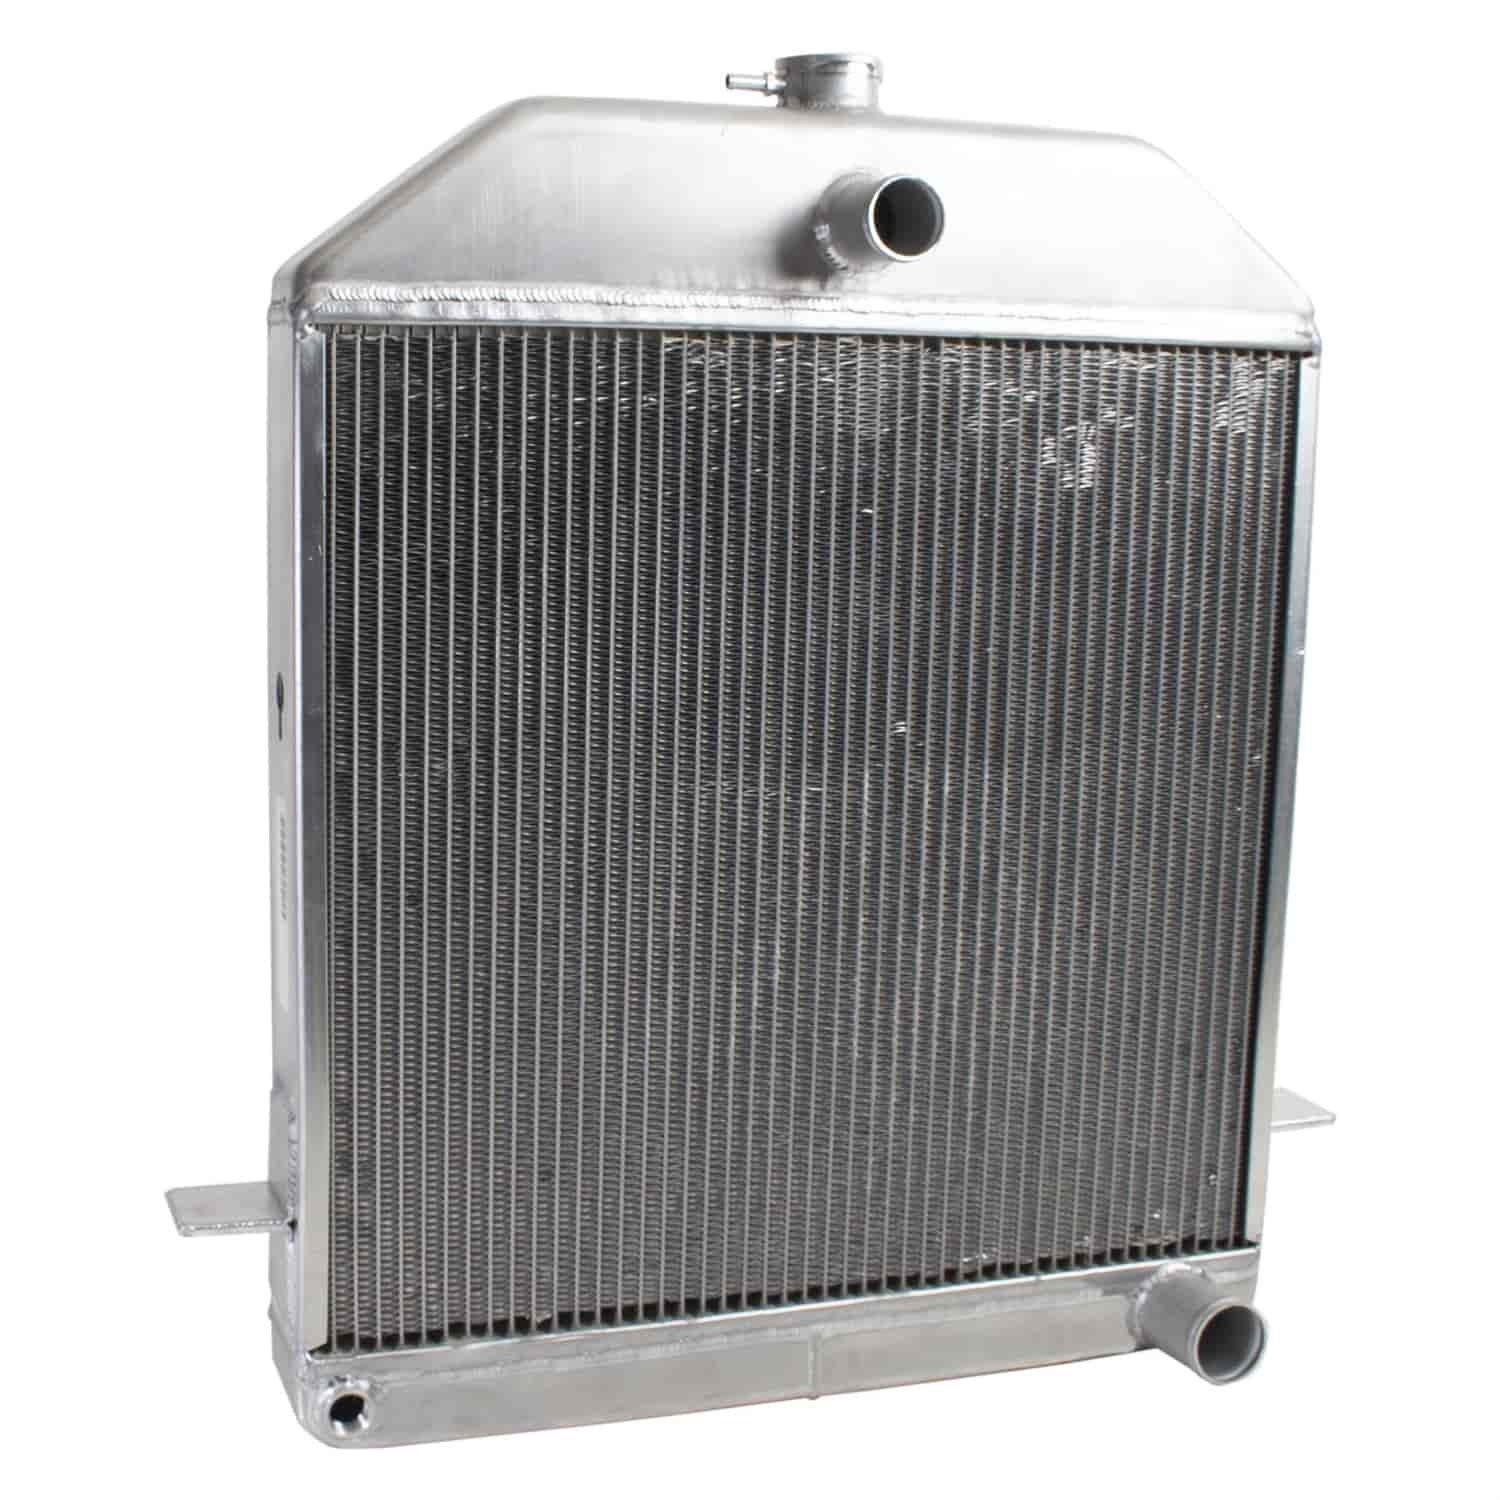 ExactFit Radiator for 1939-1940 Ford Deluxe with Early GM Engine